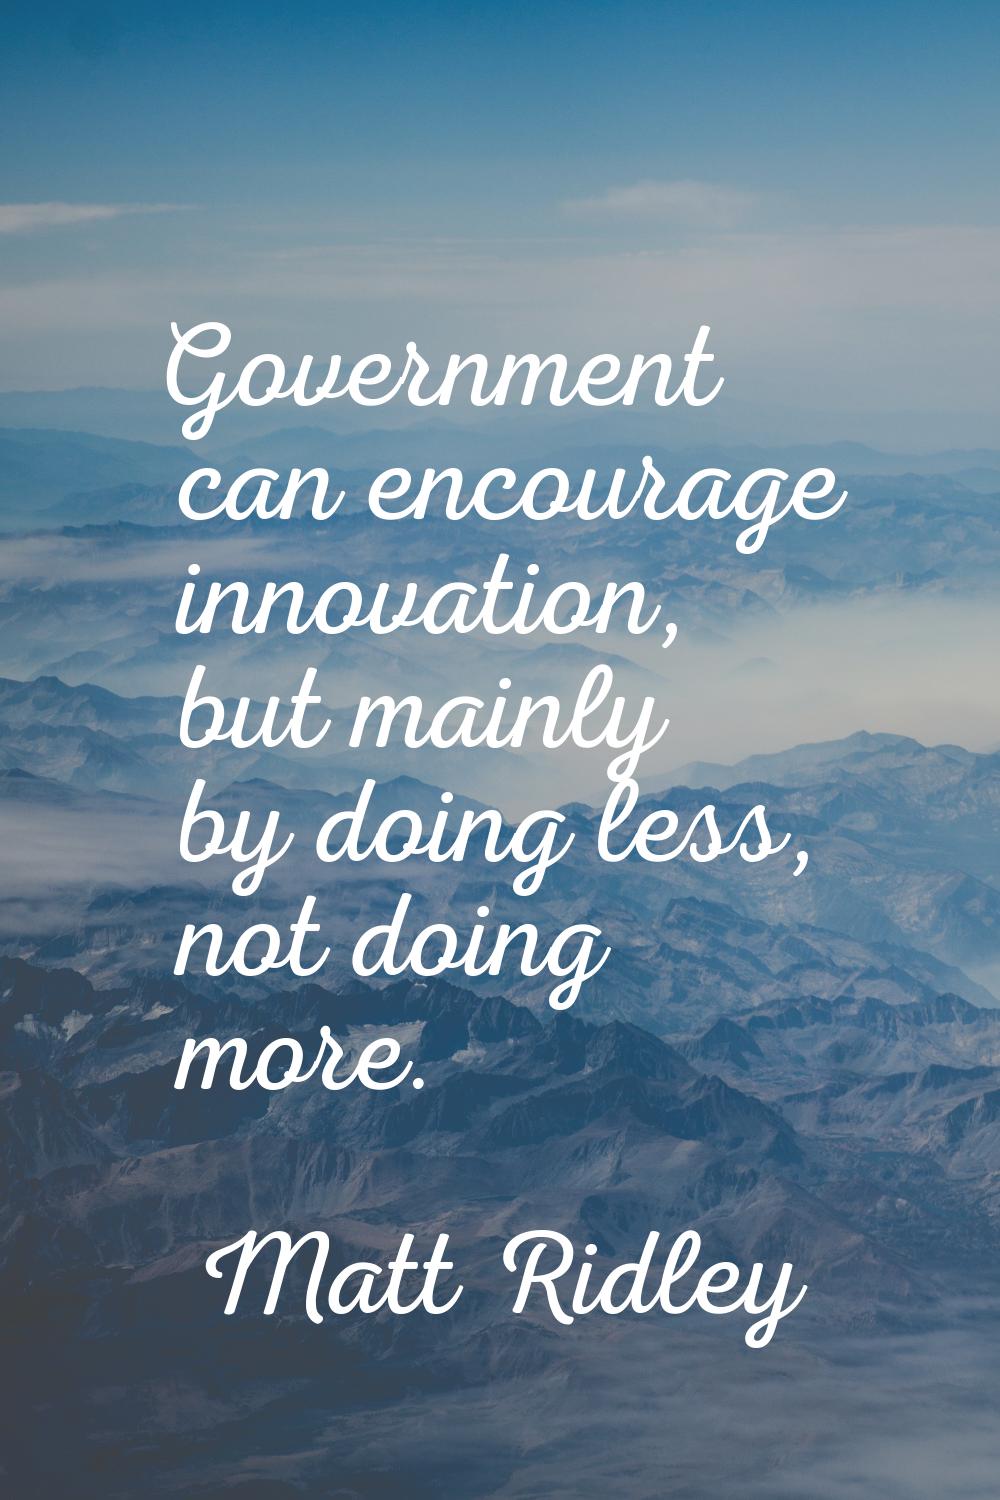 Government can encourage innovation, but mainly by doing less, not doing more.